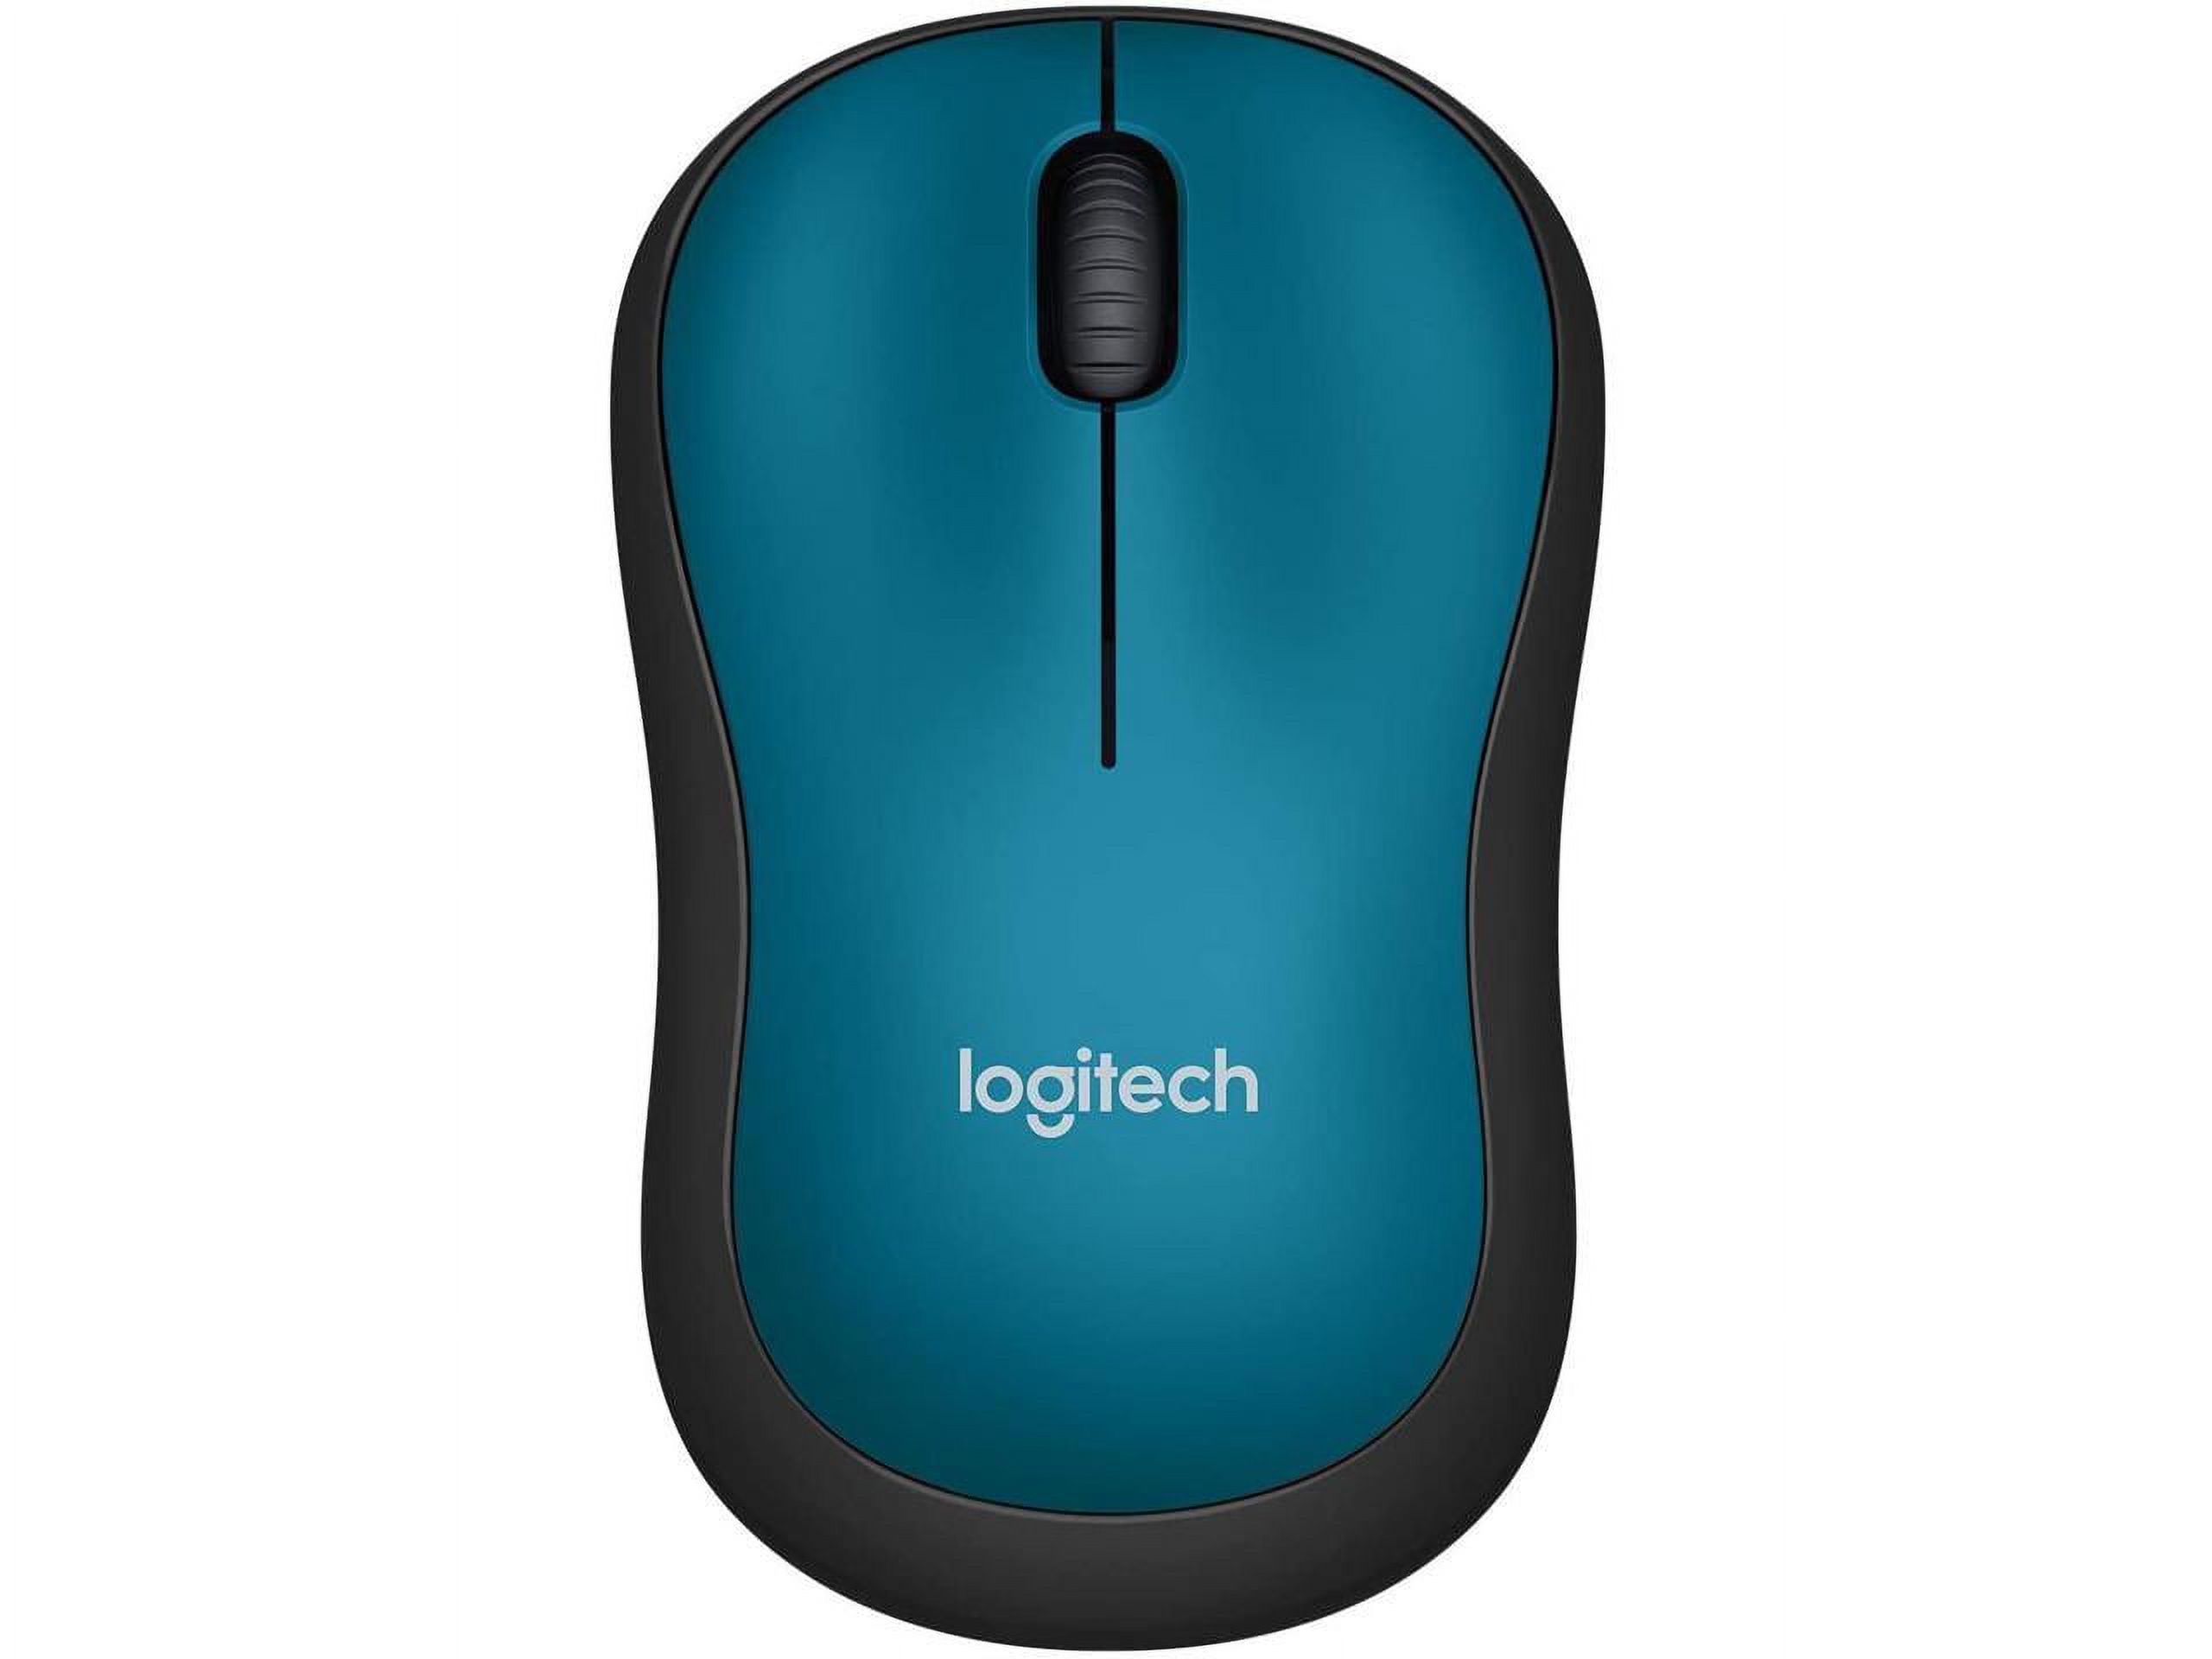 Logitech M185 Wireless Mouse, 2.4GHz with USB Mini Receiver, Ambidextrous, Blue - image 1 of 15